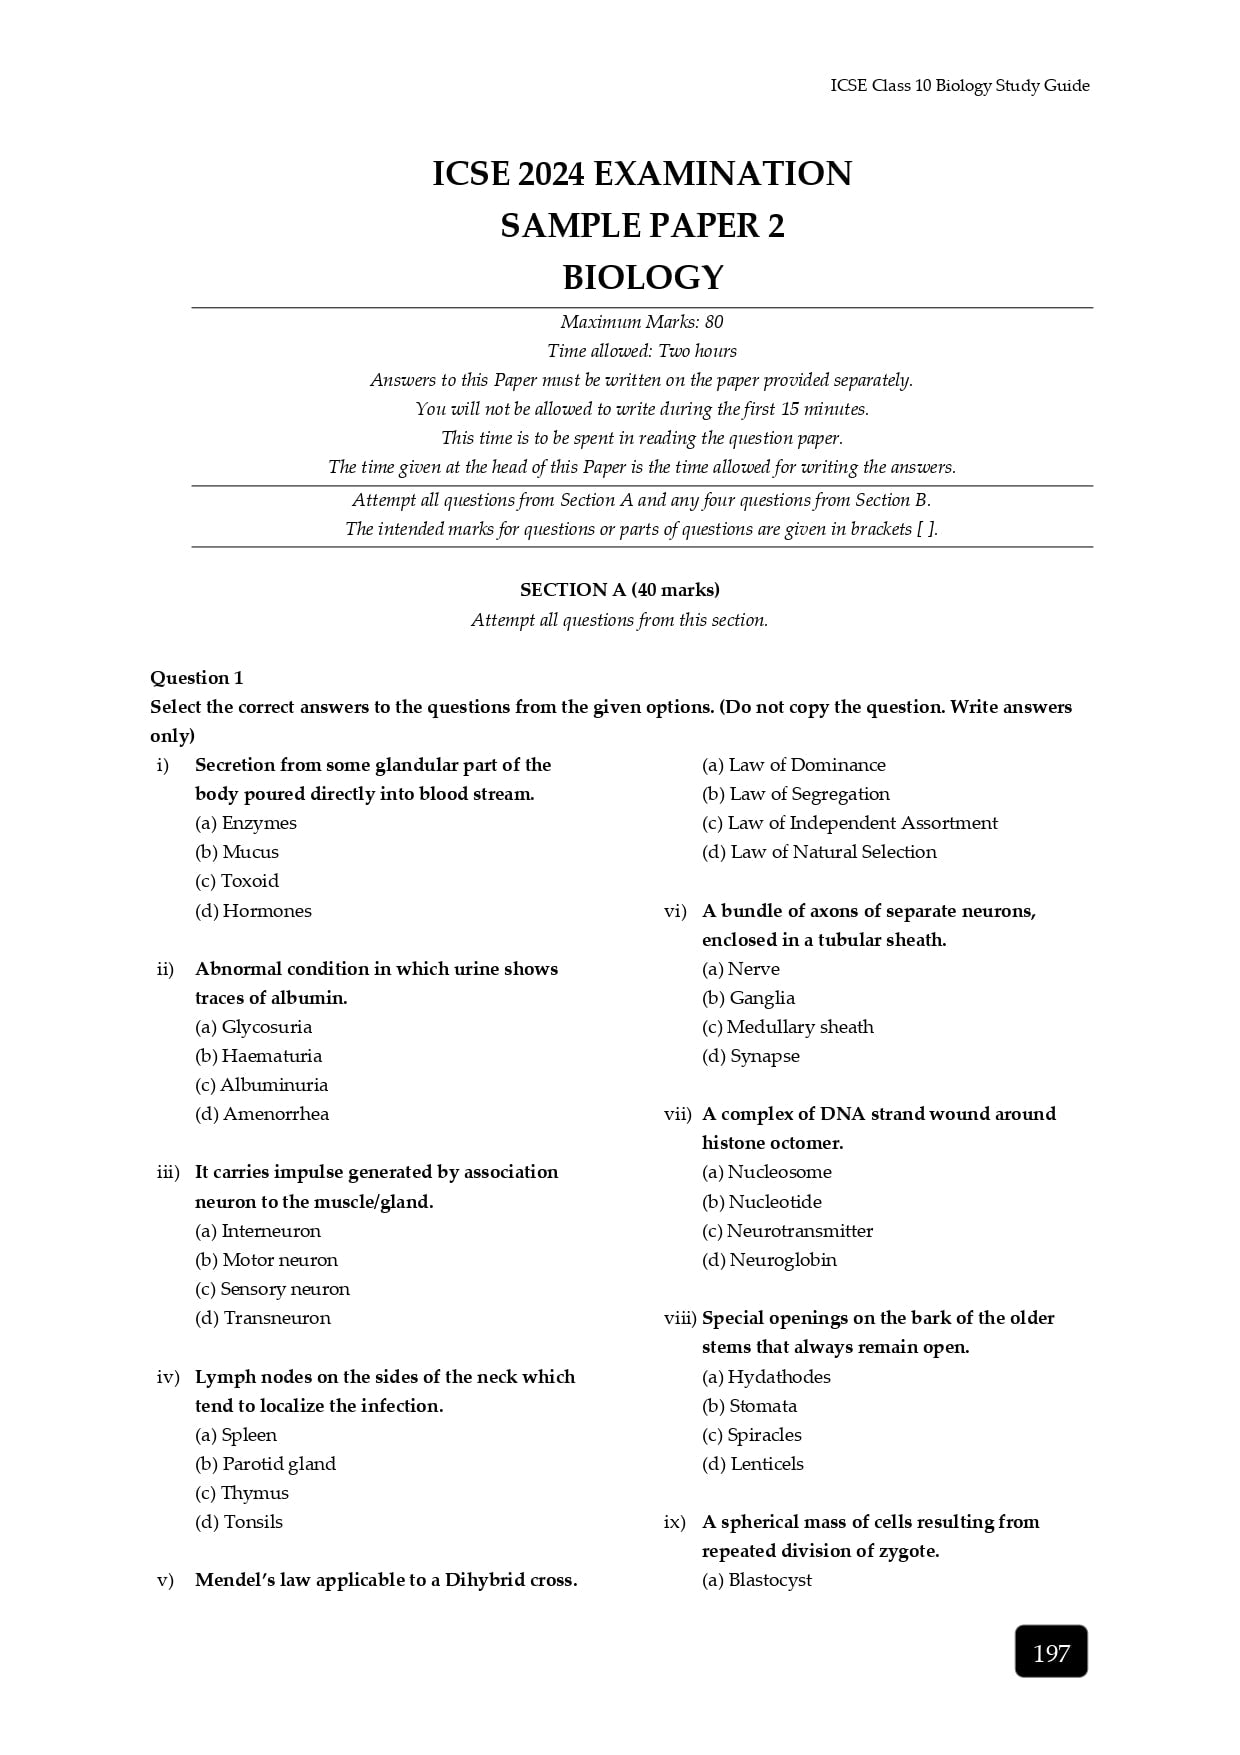 sample paper of latest icse biology study guide of almond books as per icse syllabus of 2024